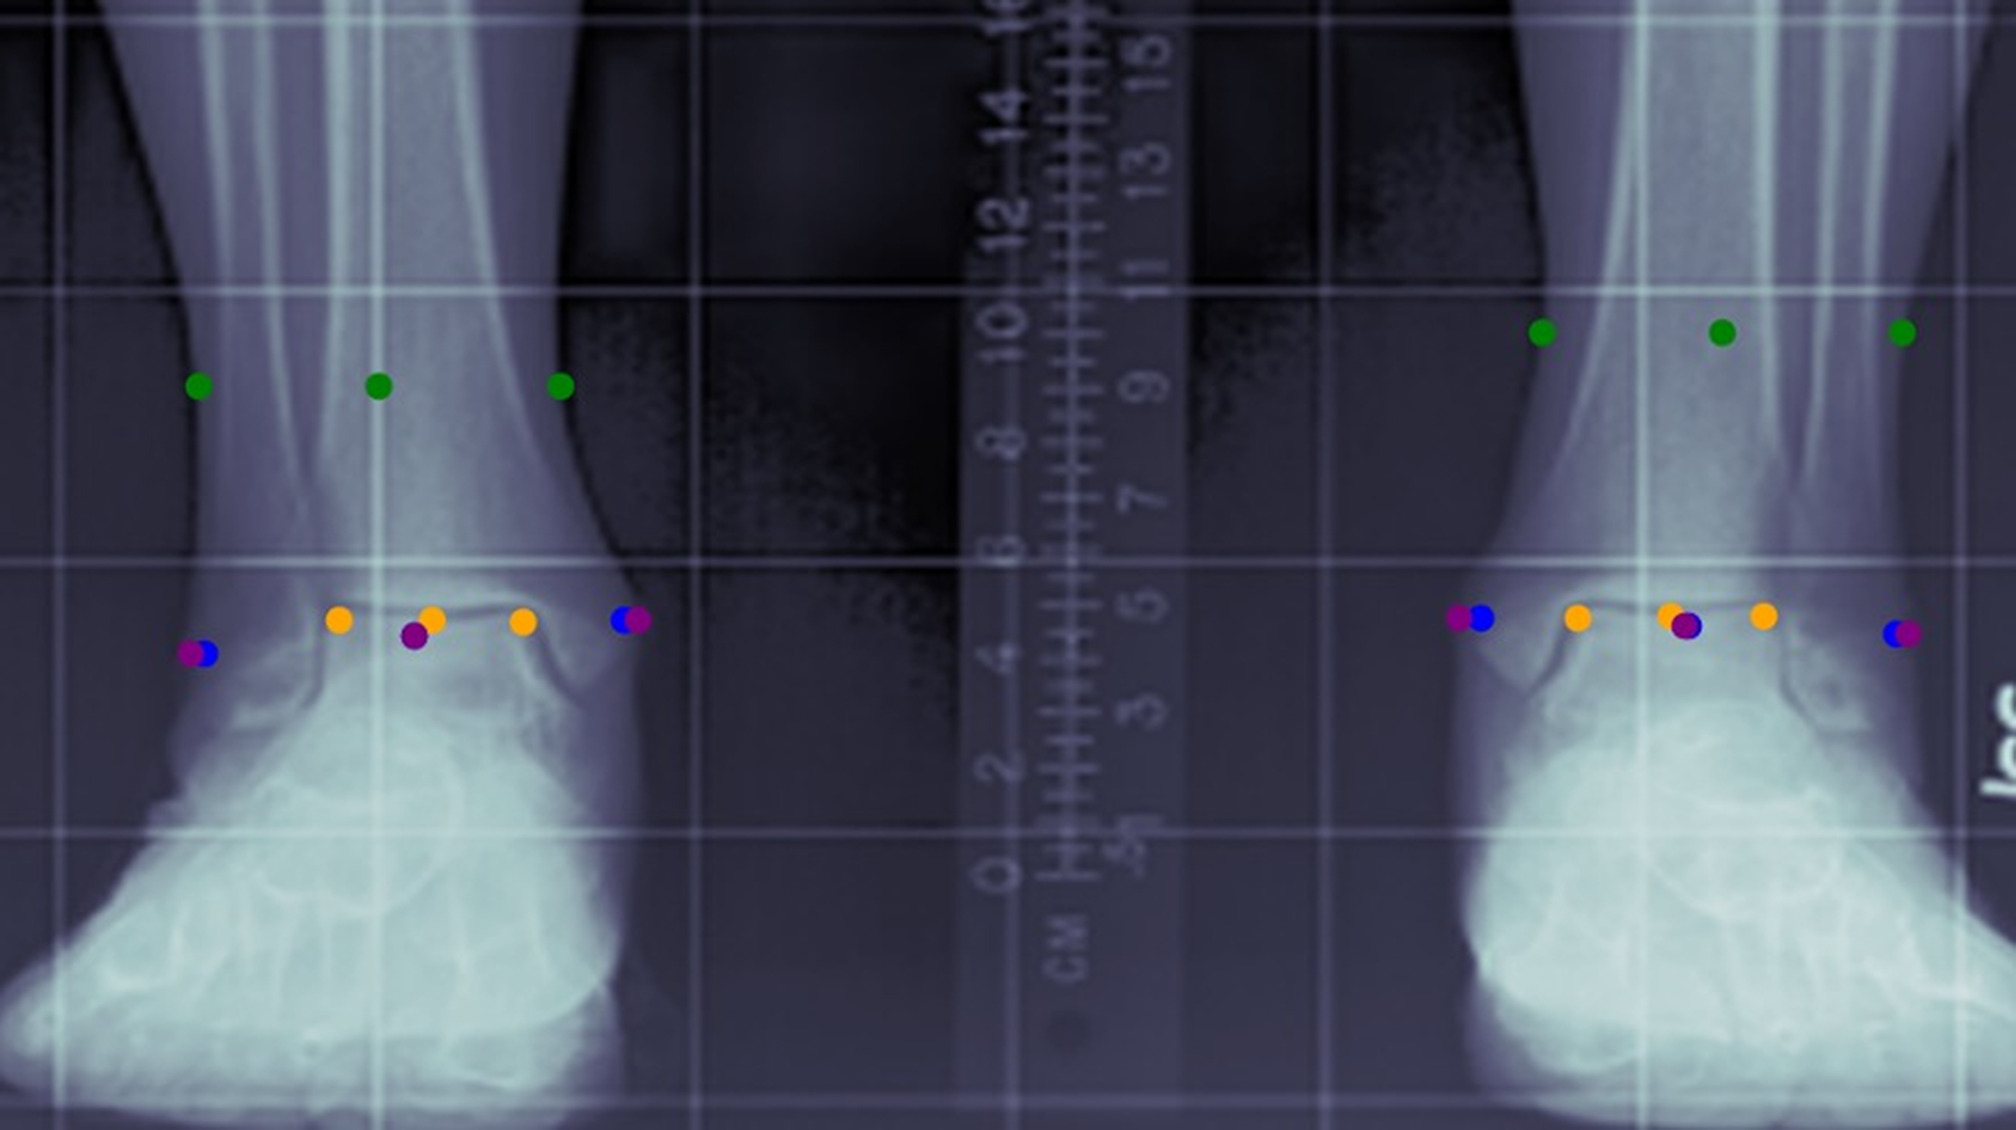 Fig. 3 
            Distal anatomical landmarks based on colour. Orange = radiological ankle center. Blue = medial and lateral malleoli. Purple = soft tissue overlying malleoli. Green = soft tissue sulcus.
          